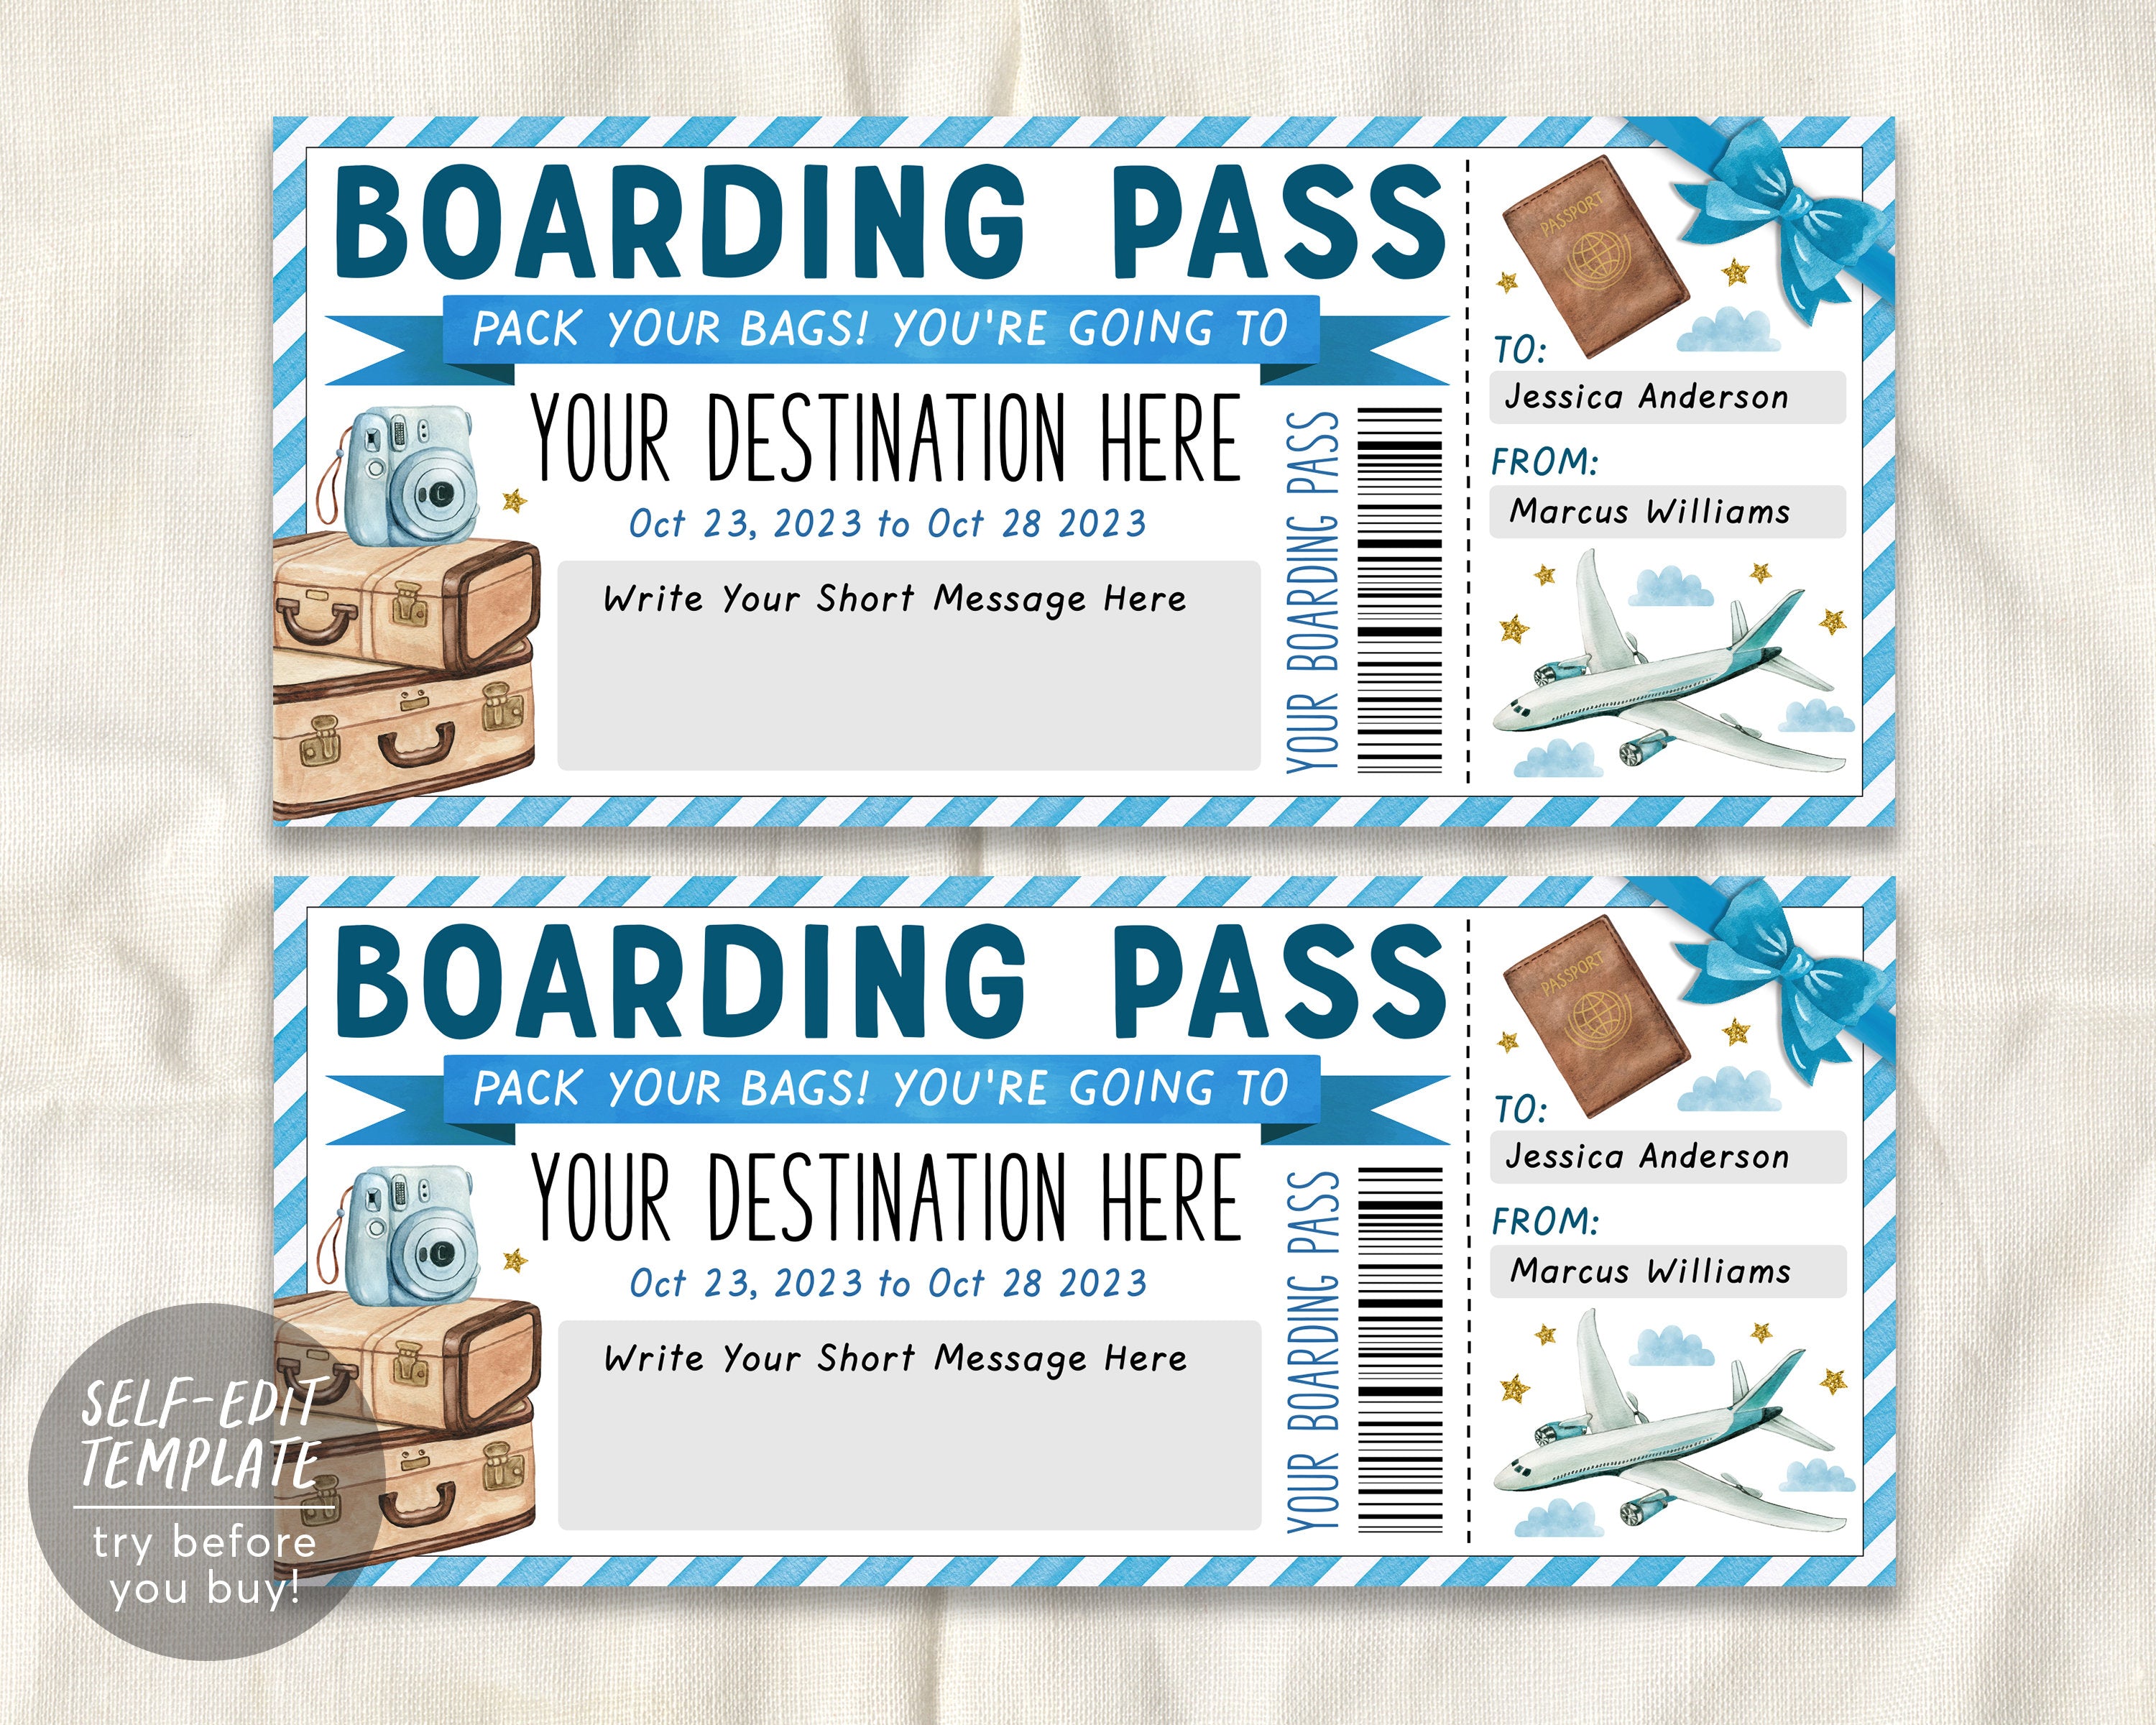 Plane Ticket to Fill or Customizable Scratch Boarding Pass Surprise Travel  Ad Original Travel Personalized Christmas Gift Holiday 